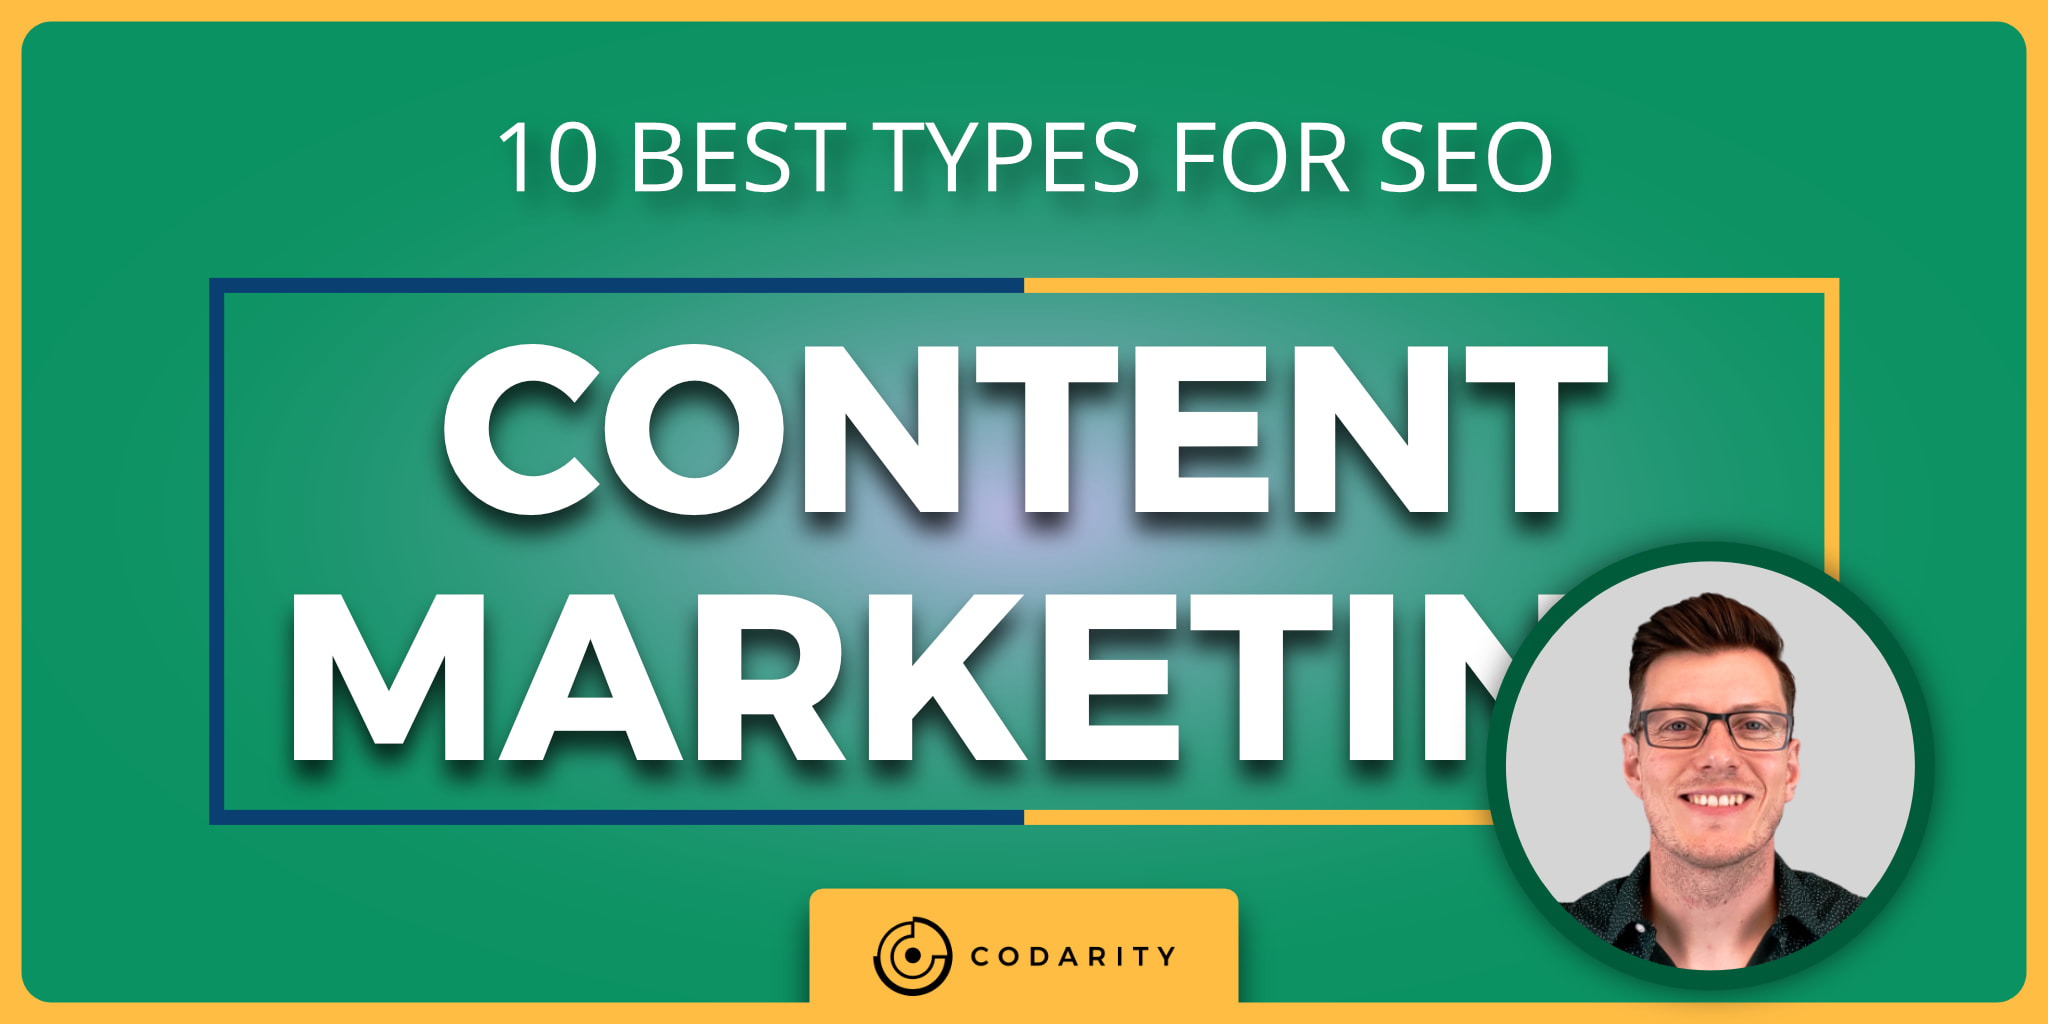 Featured image for “The 10 Best Types of Content Marketing For SEO”